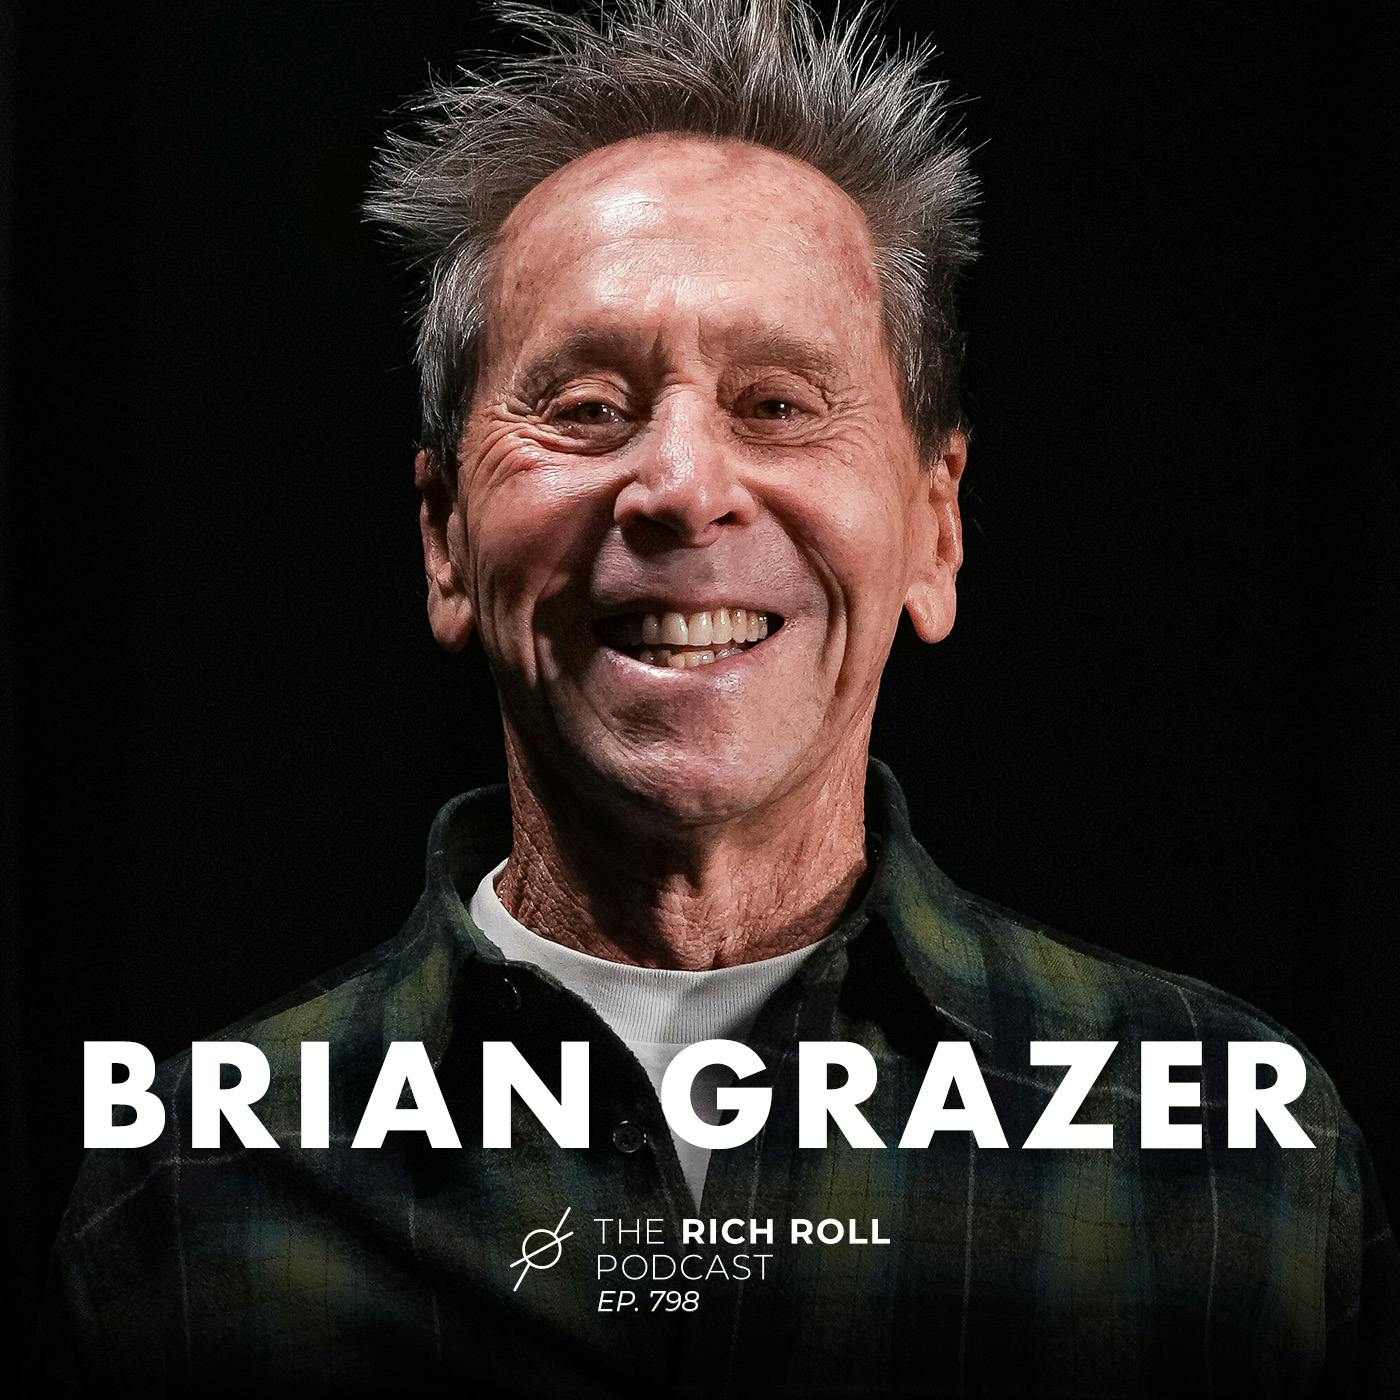 Curiosity Is A Superpower: Legendary Film Producer Brian Grazer on Beginner’s Mind, Getting It Done, & Why Conversation Matters